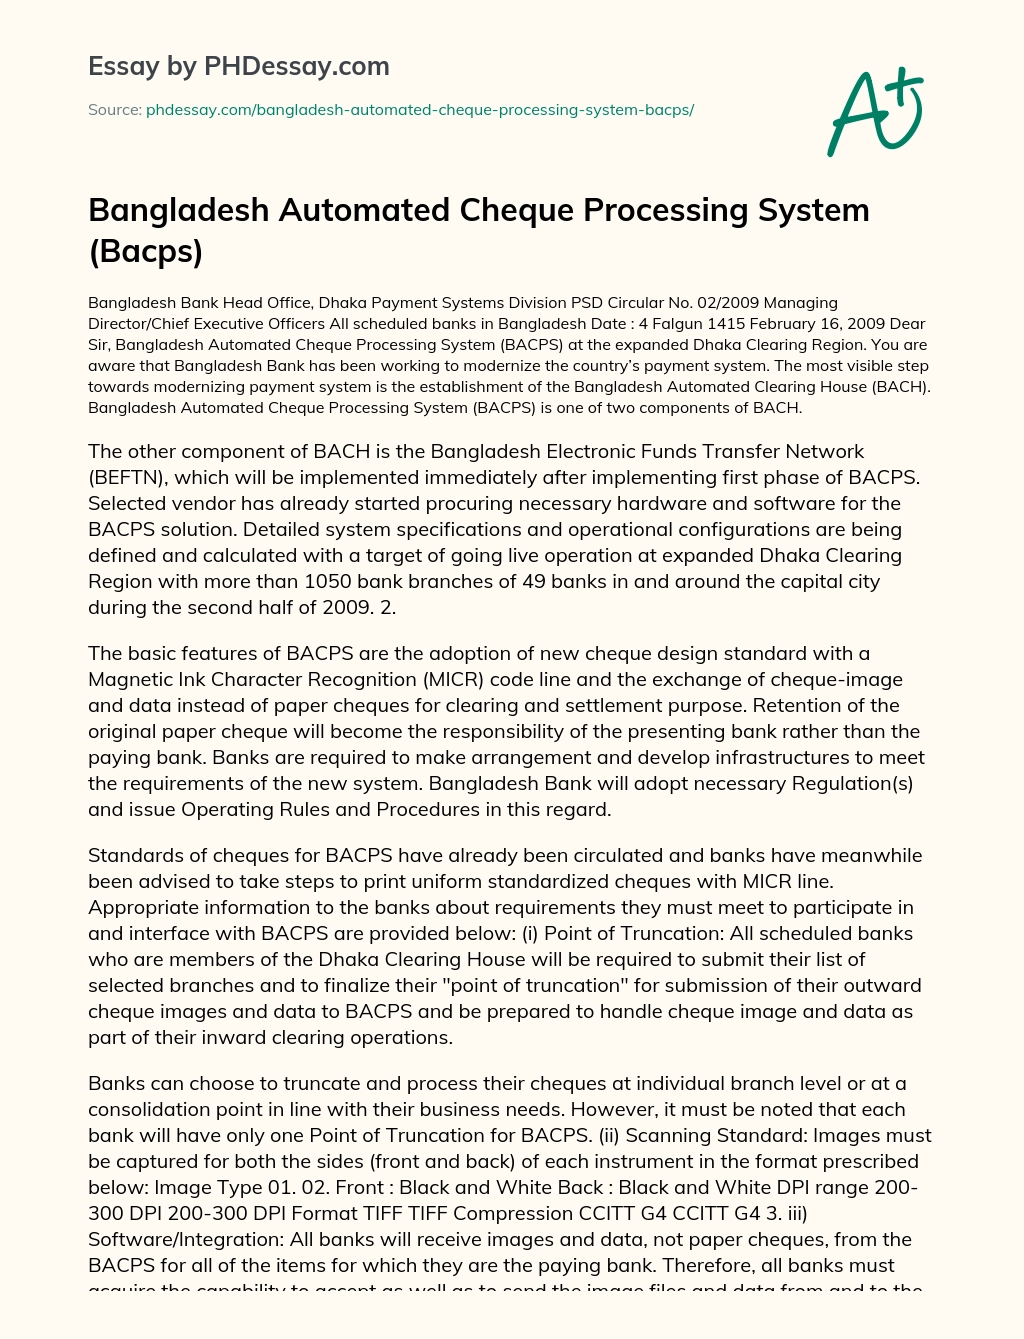 Bangladesh Automated Cheque Processing System (Bacps) essay